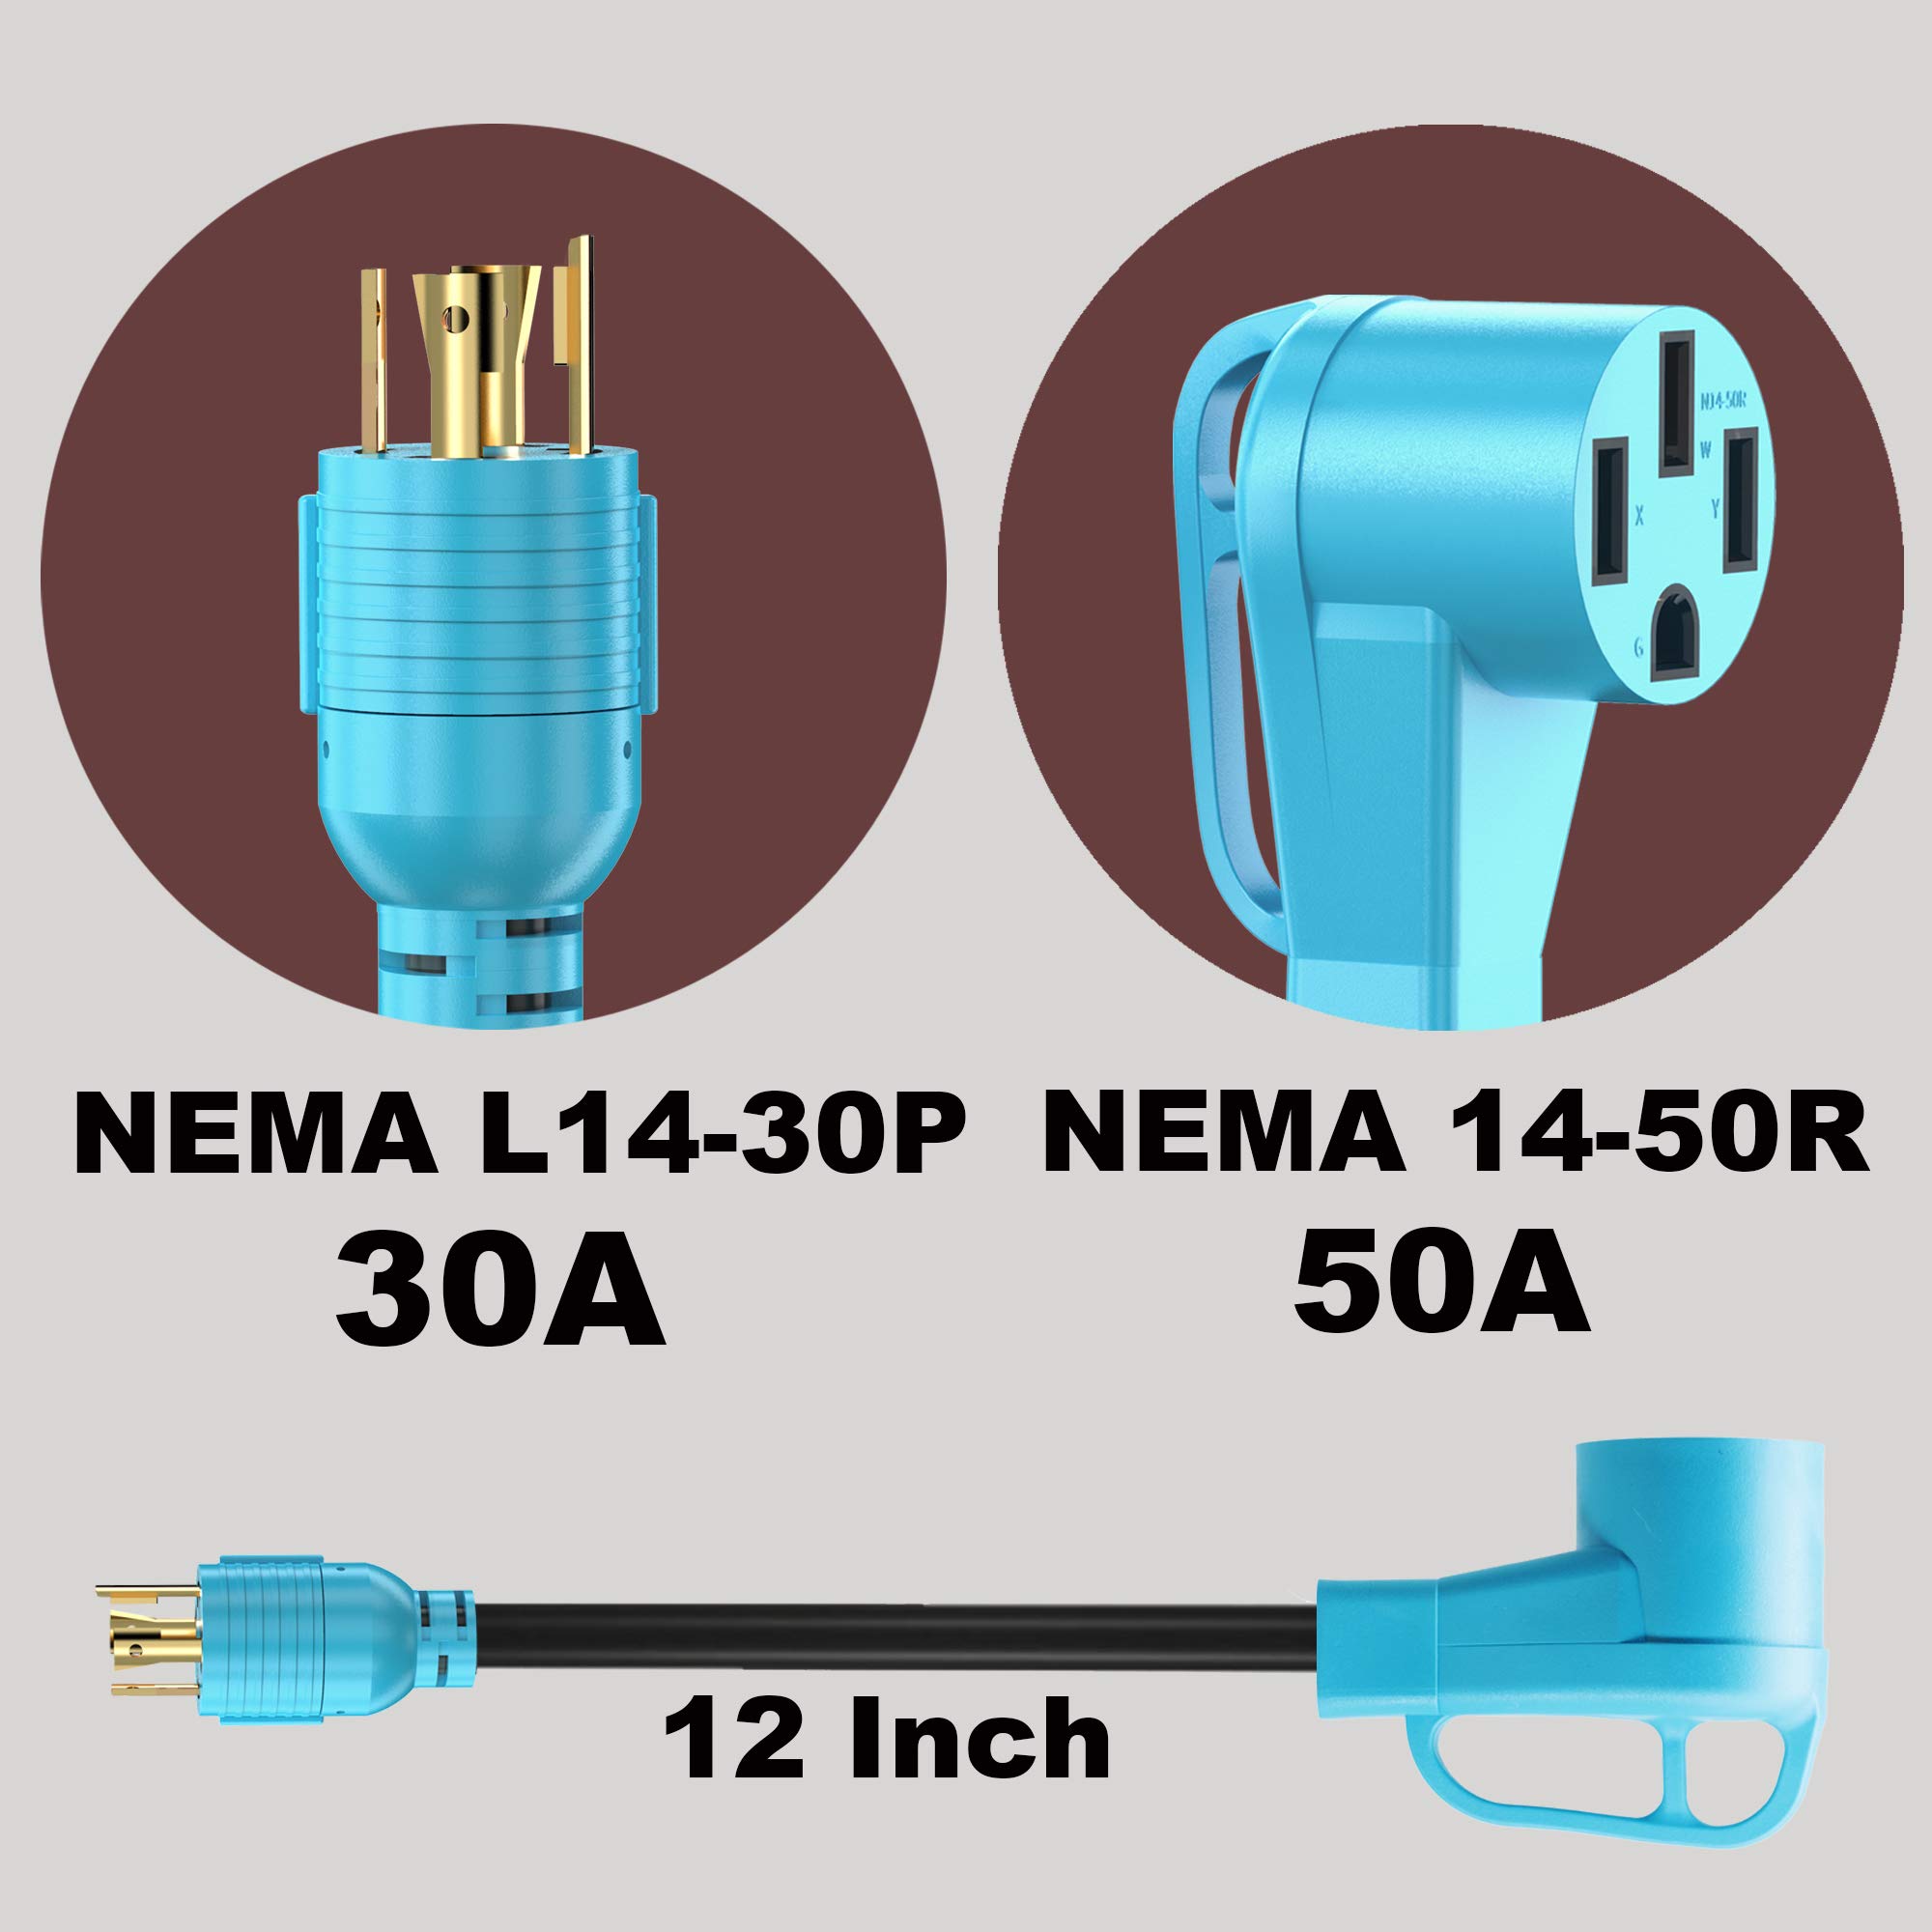 CircleCord 4 Prong 30 Amp to 50 Amp Generator to RV/EV Adapter Cord, NEMA L14-30P to 14-50R, Heavy Duty STW 10 AWG Suit for Tesla Model S/3/X/Y Charging or Generator to House and RV Trailer Camper